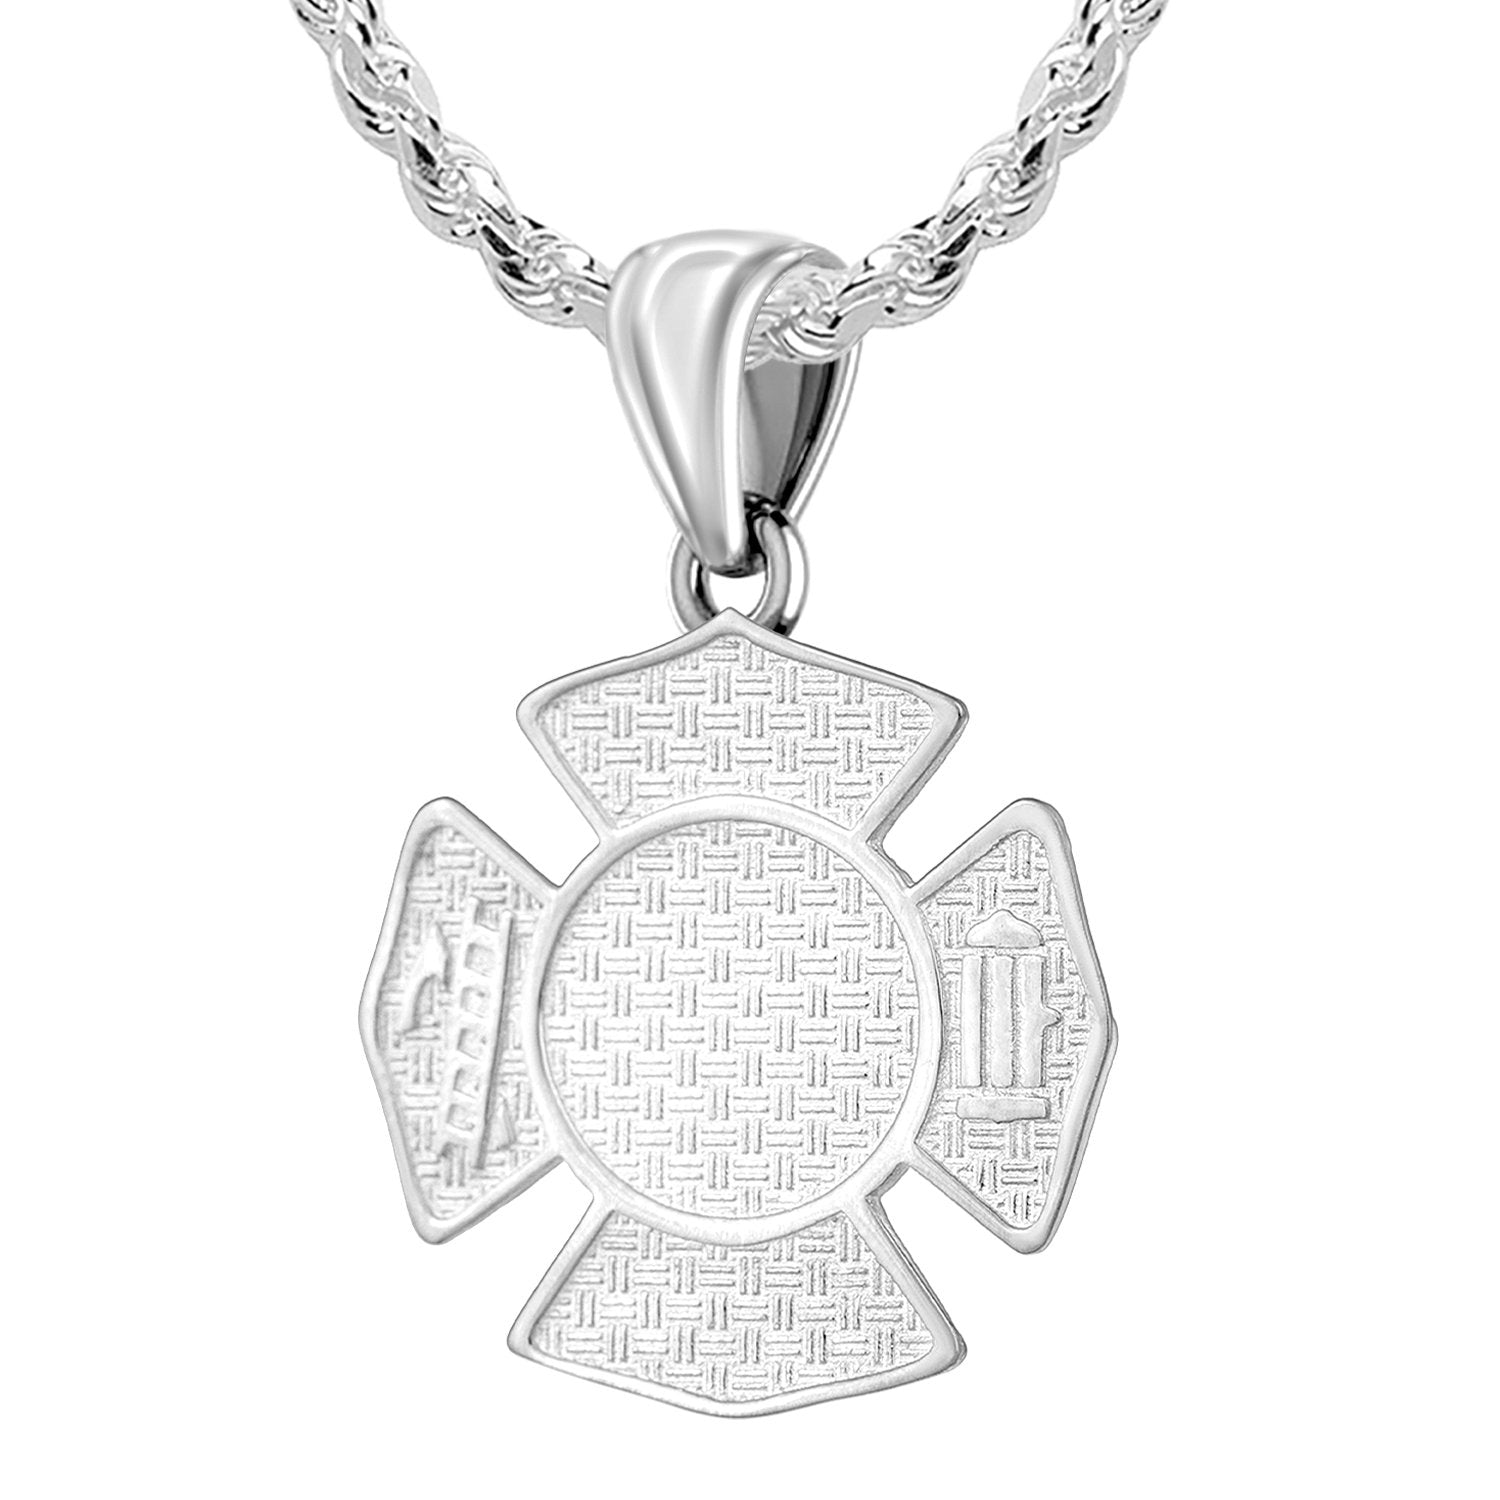 Firefighter Pendant of 26mm Length - 2.5mm Rope Chain